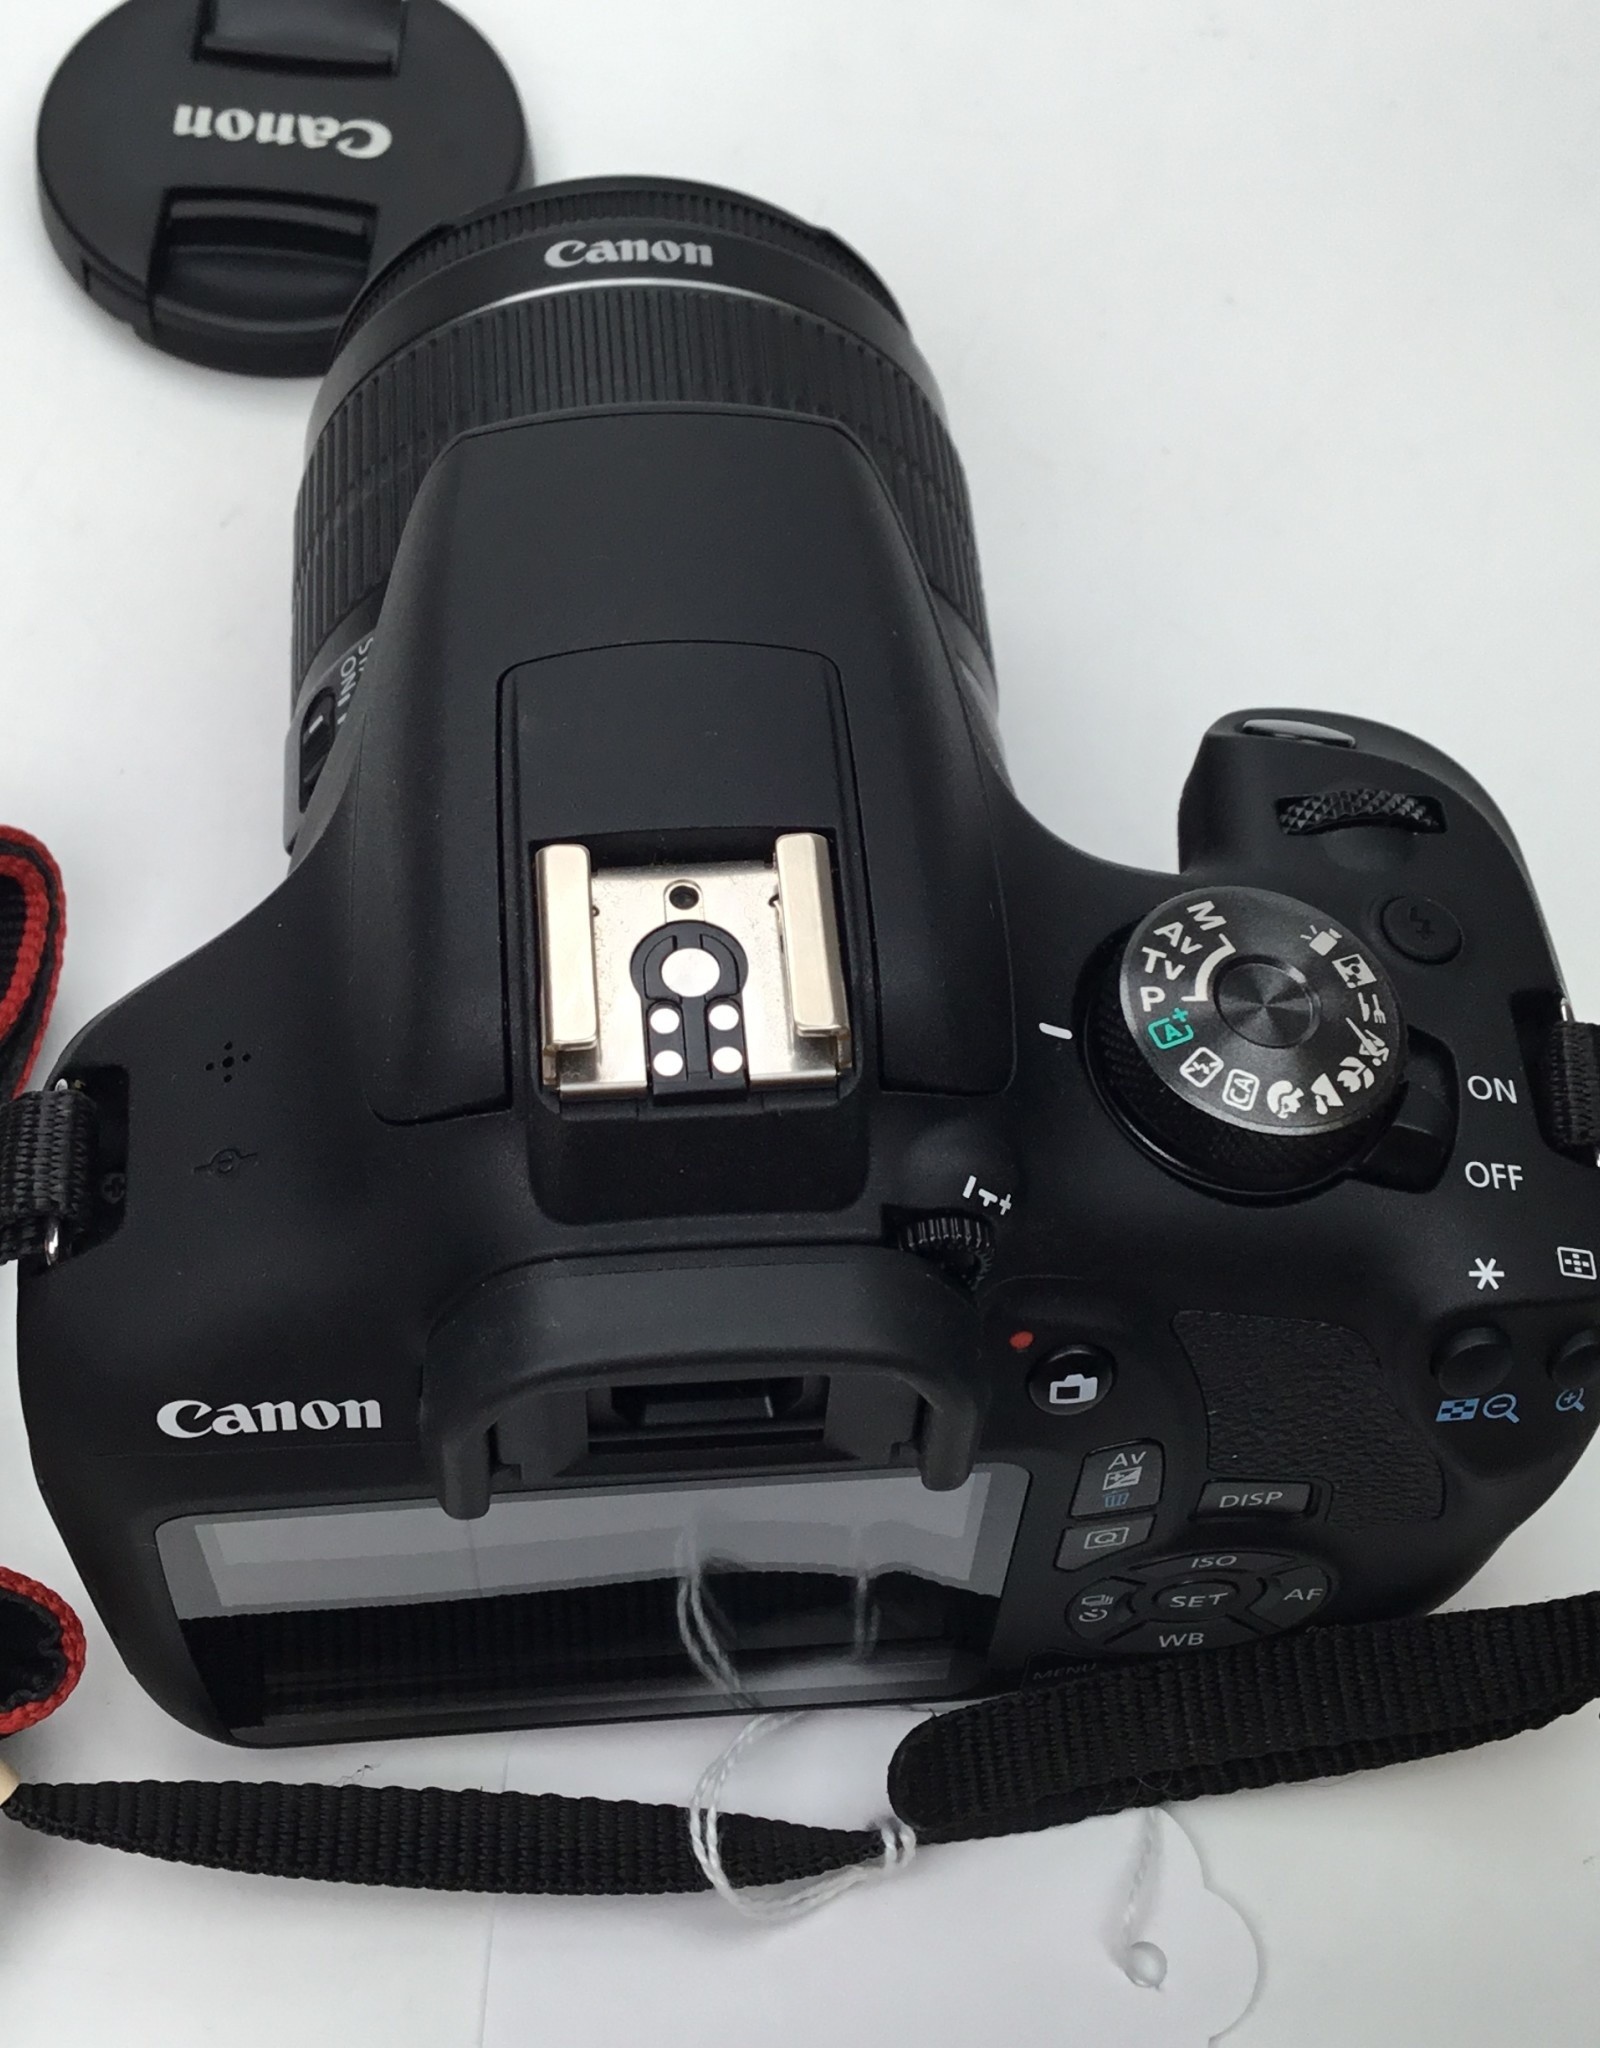 CANON Canon EOS Rebel T7 Camera w/ 18-55mm IS II Used Good